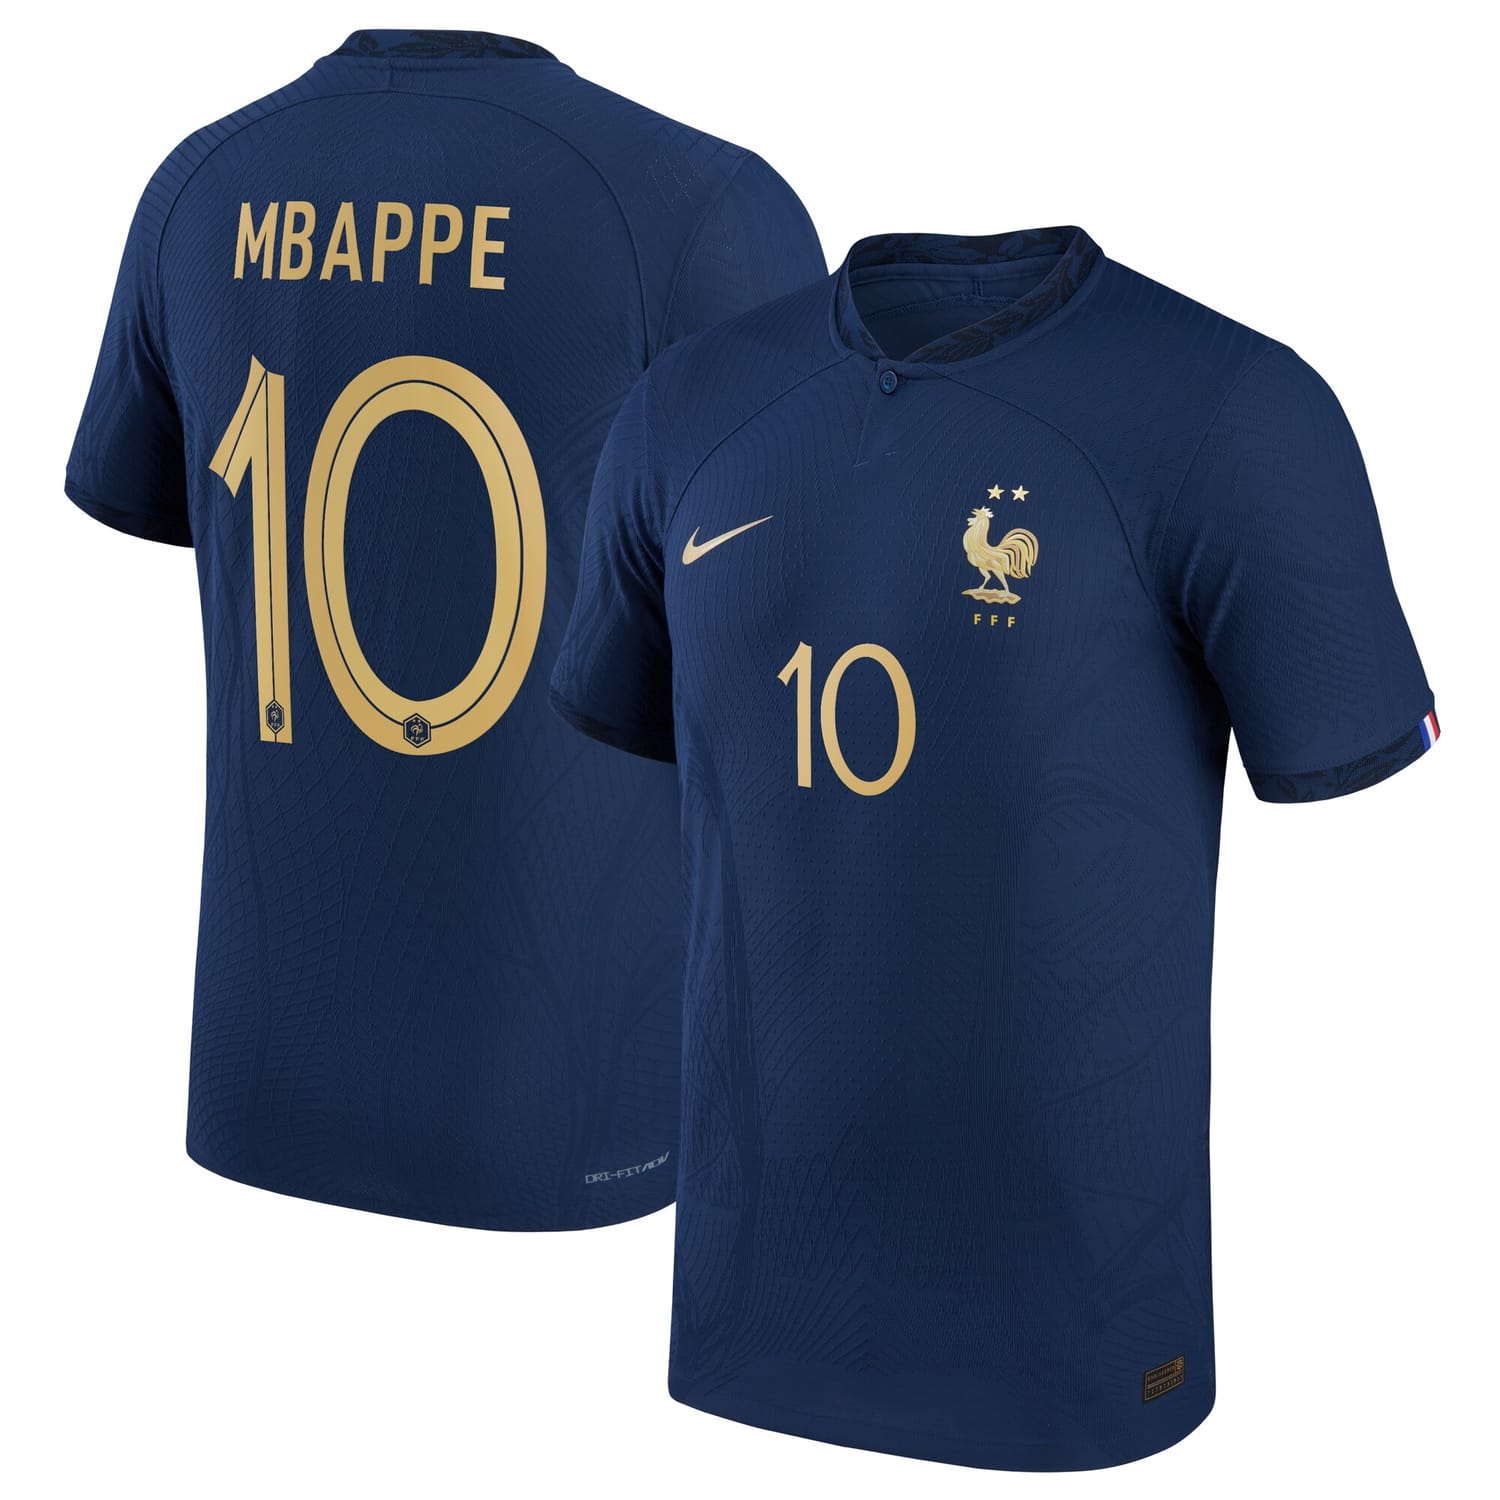 France National Team Home Authentic Jersey Shirt 2022 player Kylian Mbappé 10 printing for Men